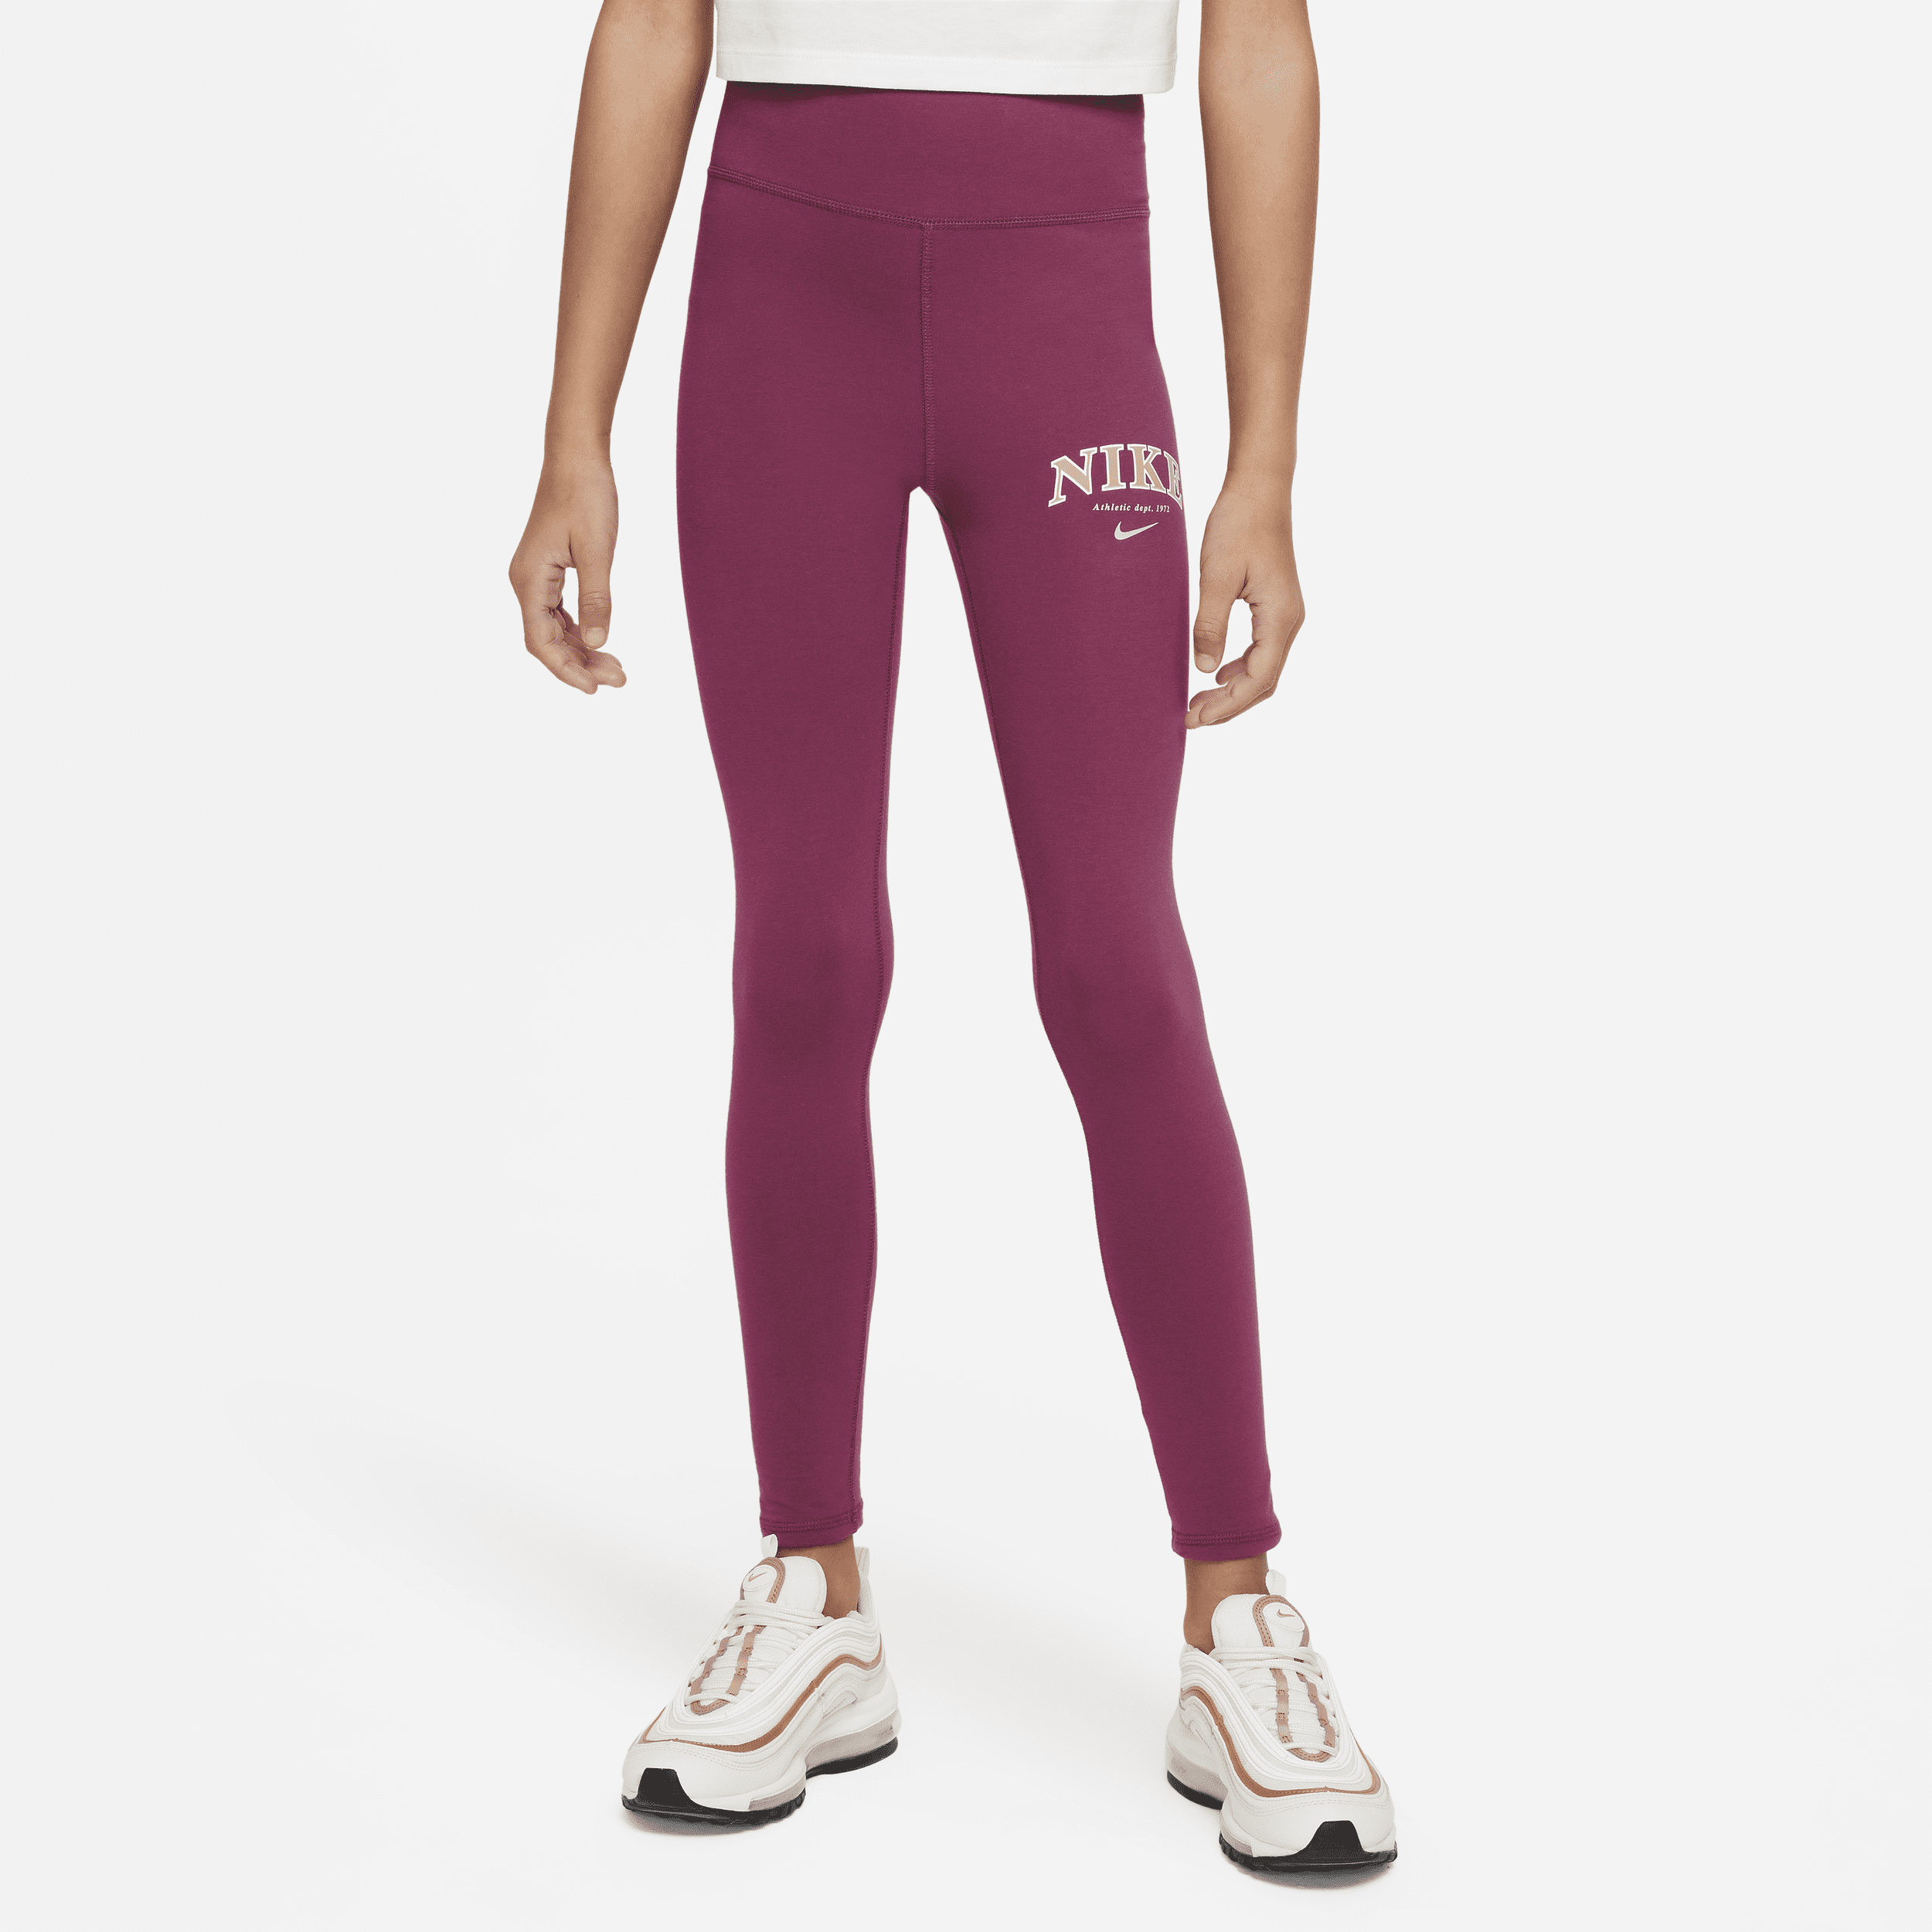 Blanchardstown Centre - Girl power with these Nike Swoosh leggings from JD  Sports 💪🏻 (located on our Red Mall for all you fit fans)